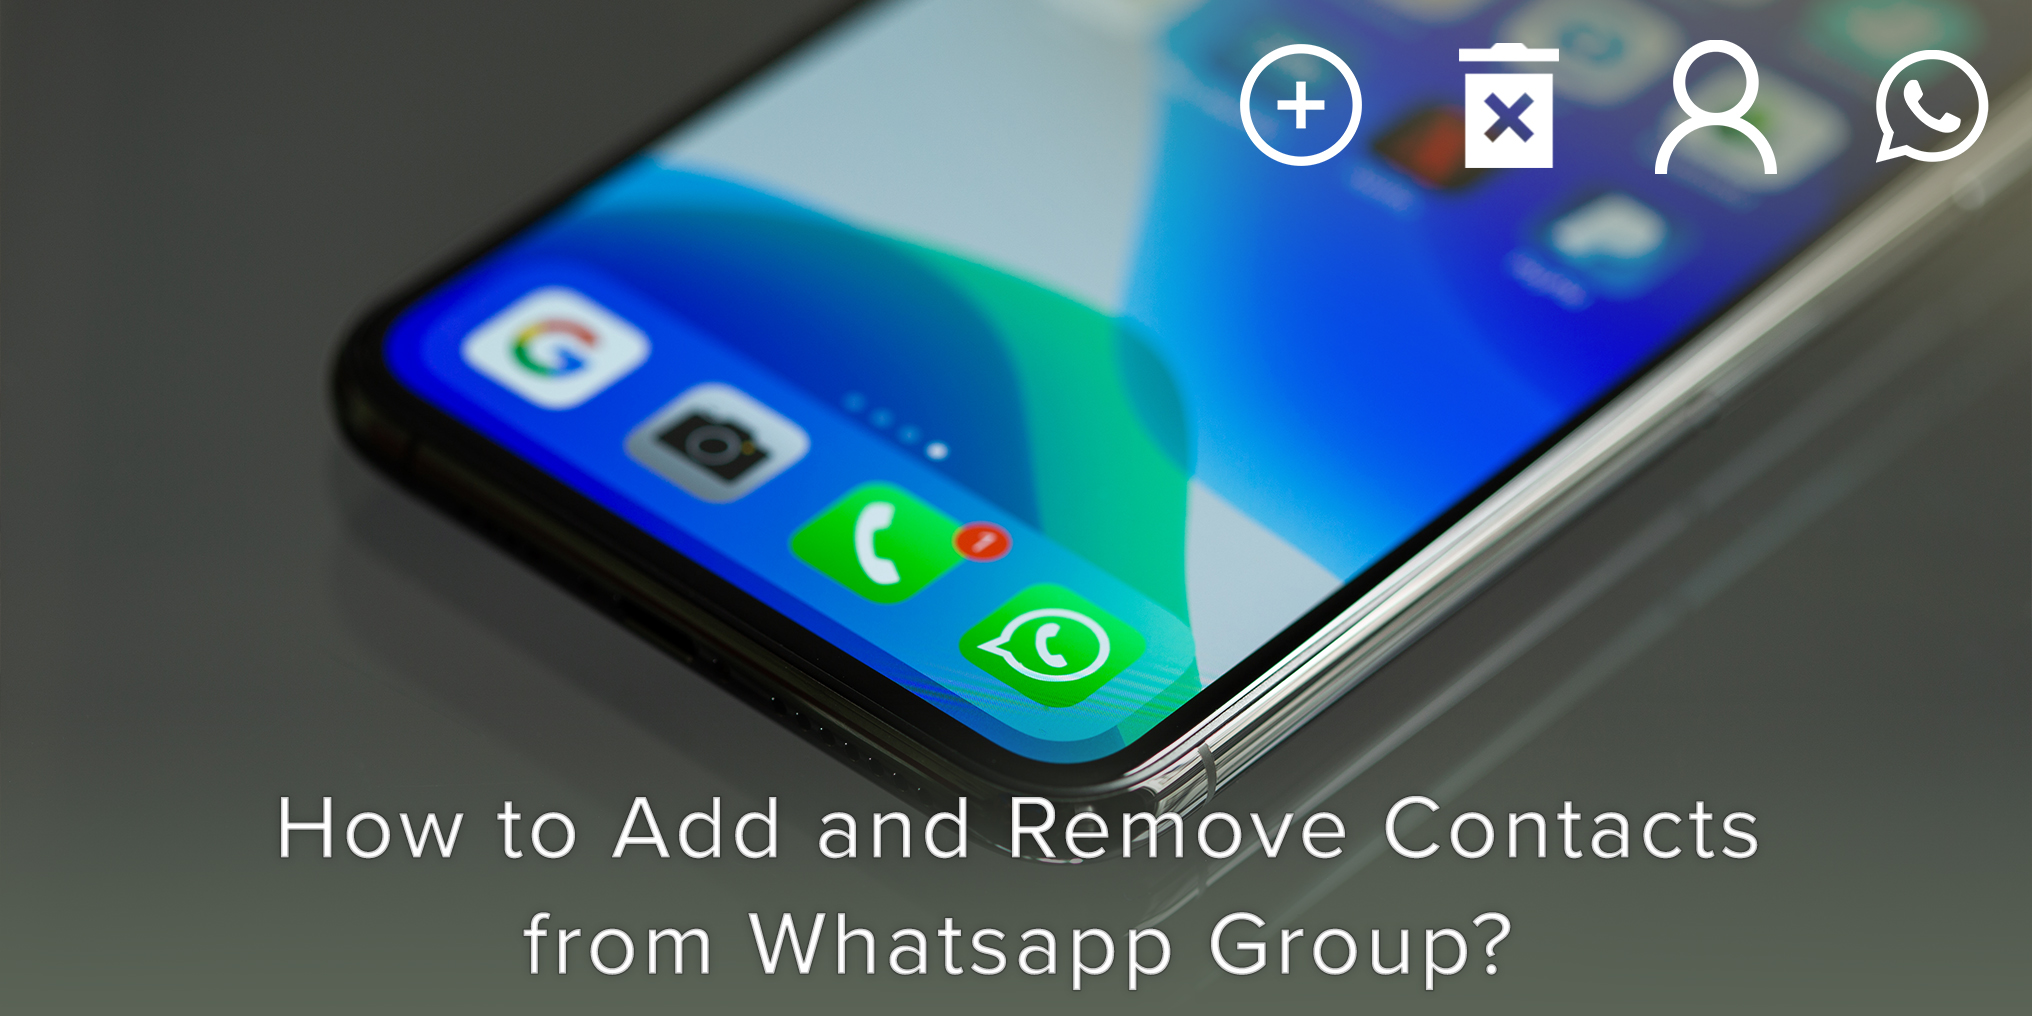 How to Add and Remove Contacts from WhatsApp Group Using an iPhone - Covve